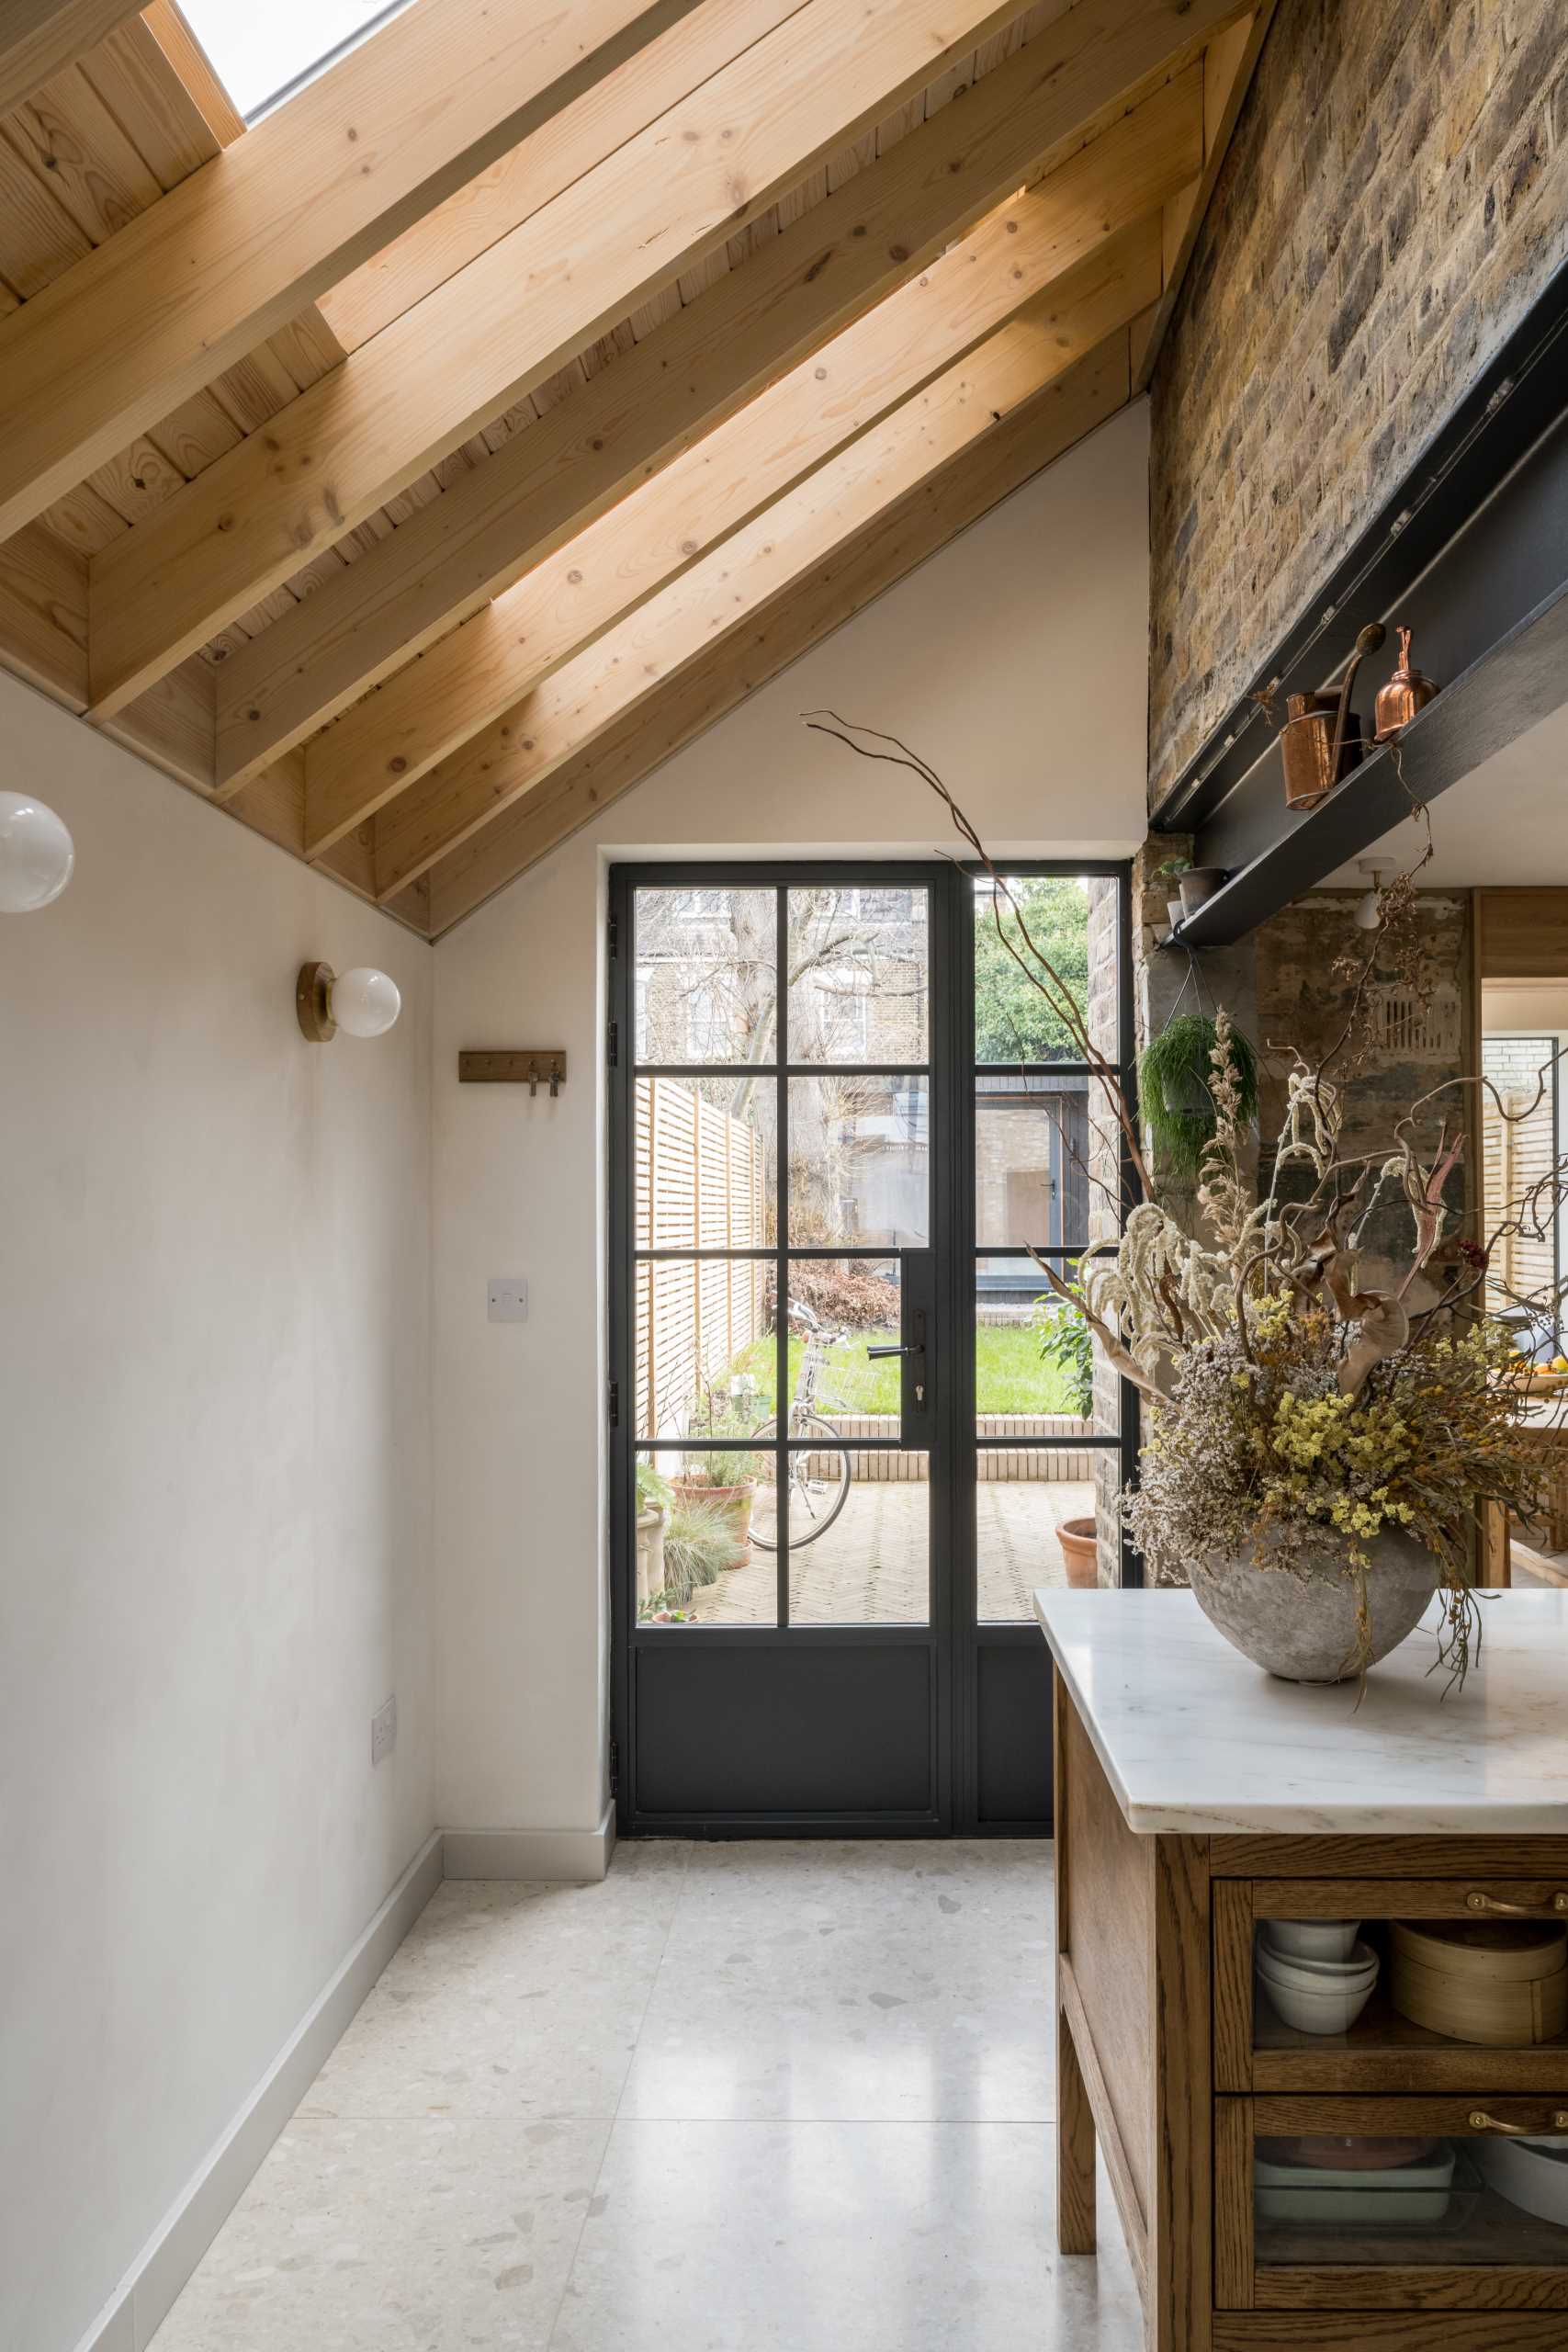 A new extension connects to the rear garden through a black-framed glass door.